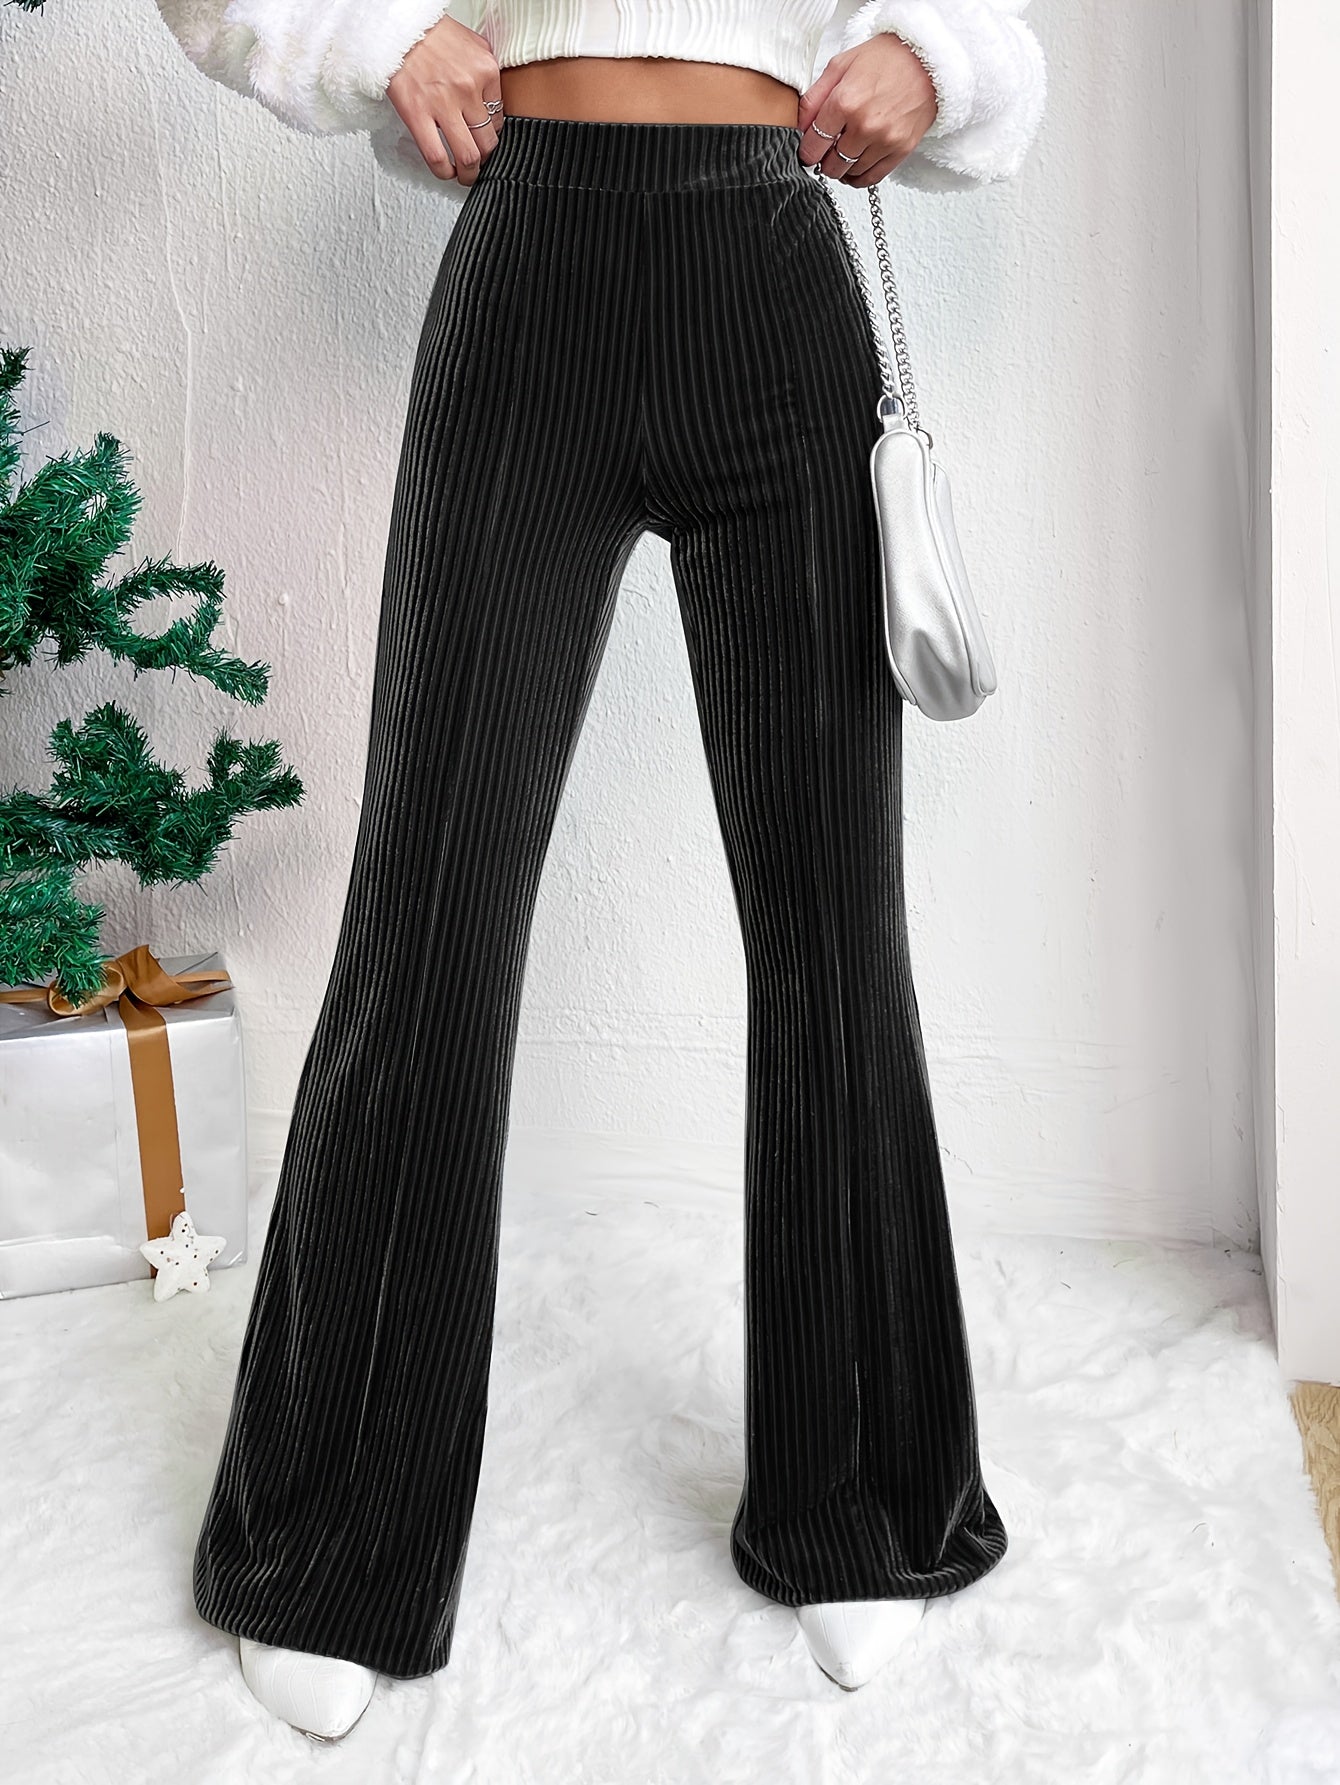 Solid High Waist Pants, Casual Flare Leg Pants For Spring & Fall, Women's Clothing